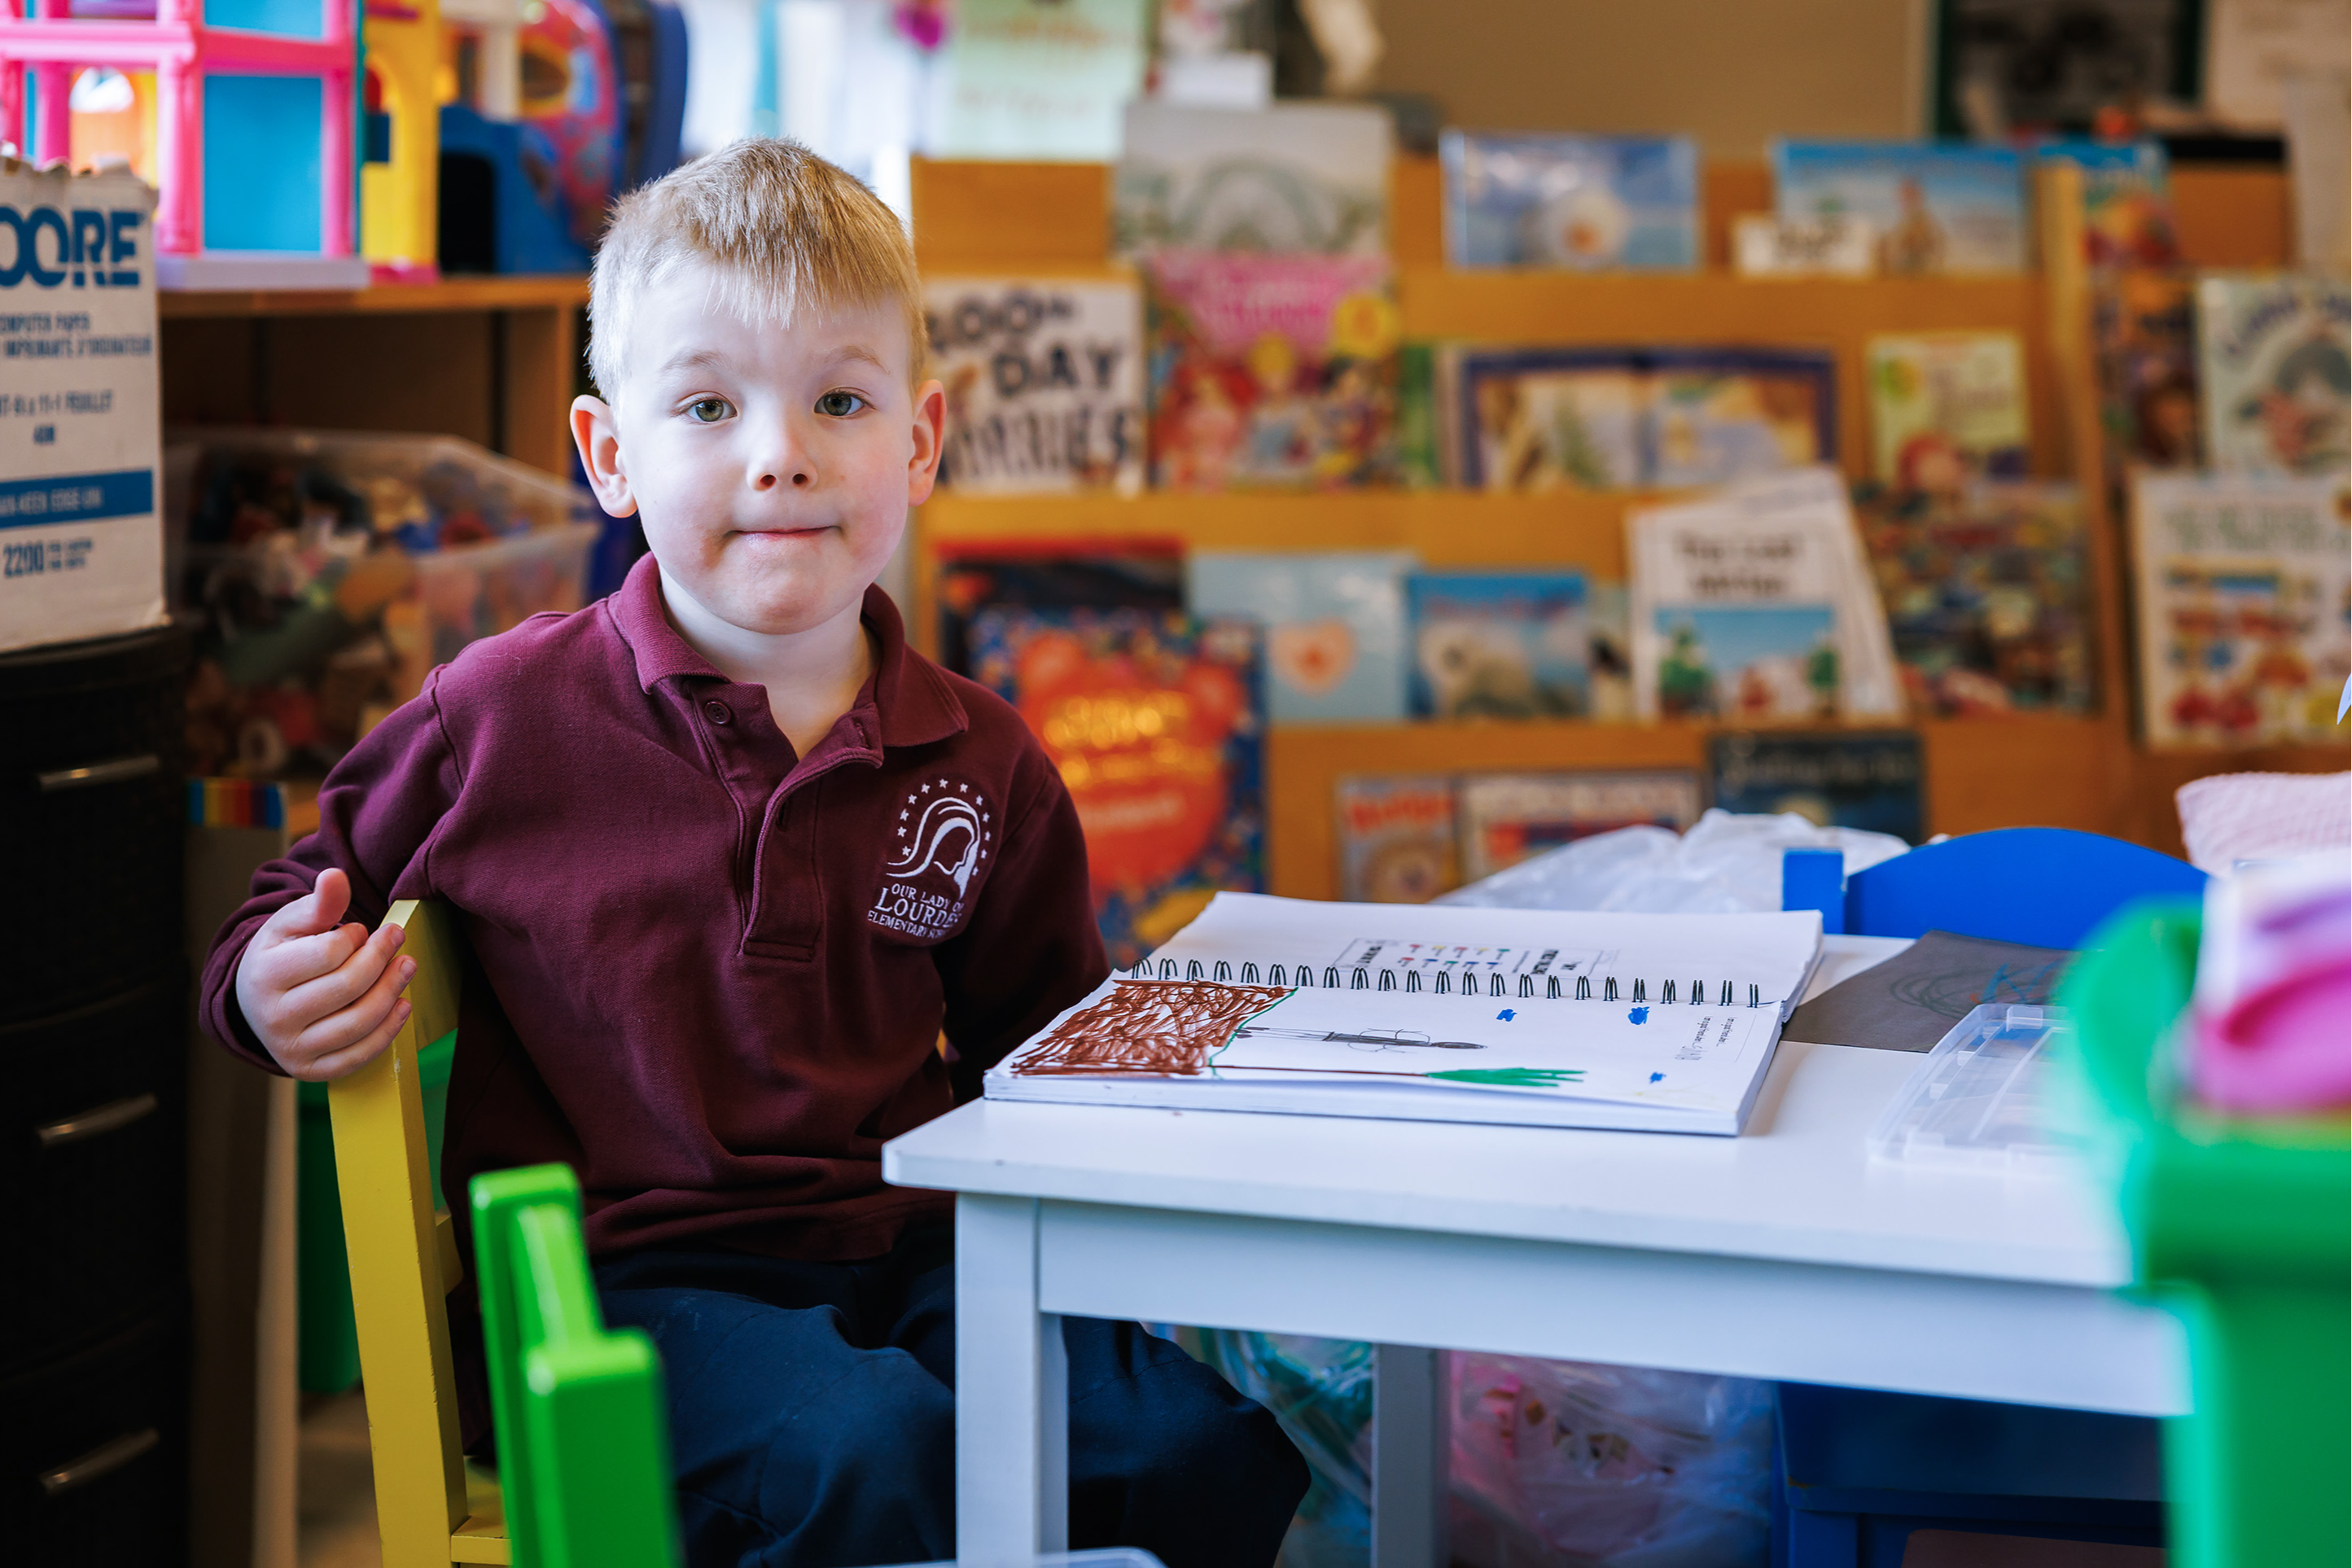 Boy with workbook on desk and reading books behind him